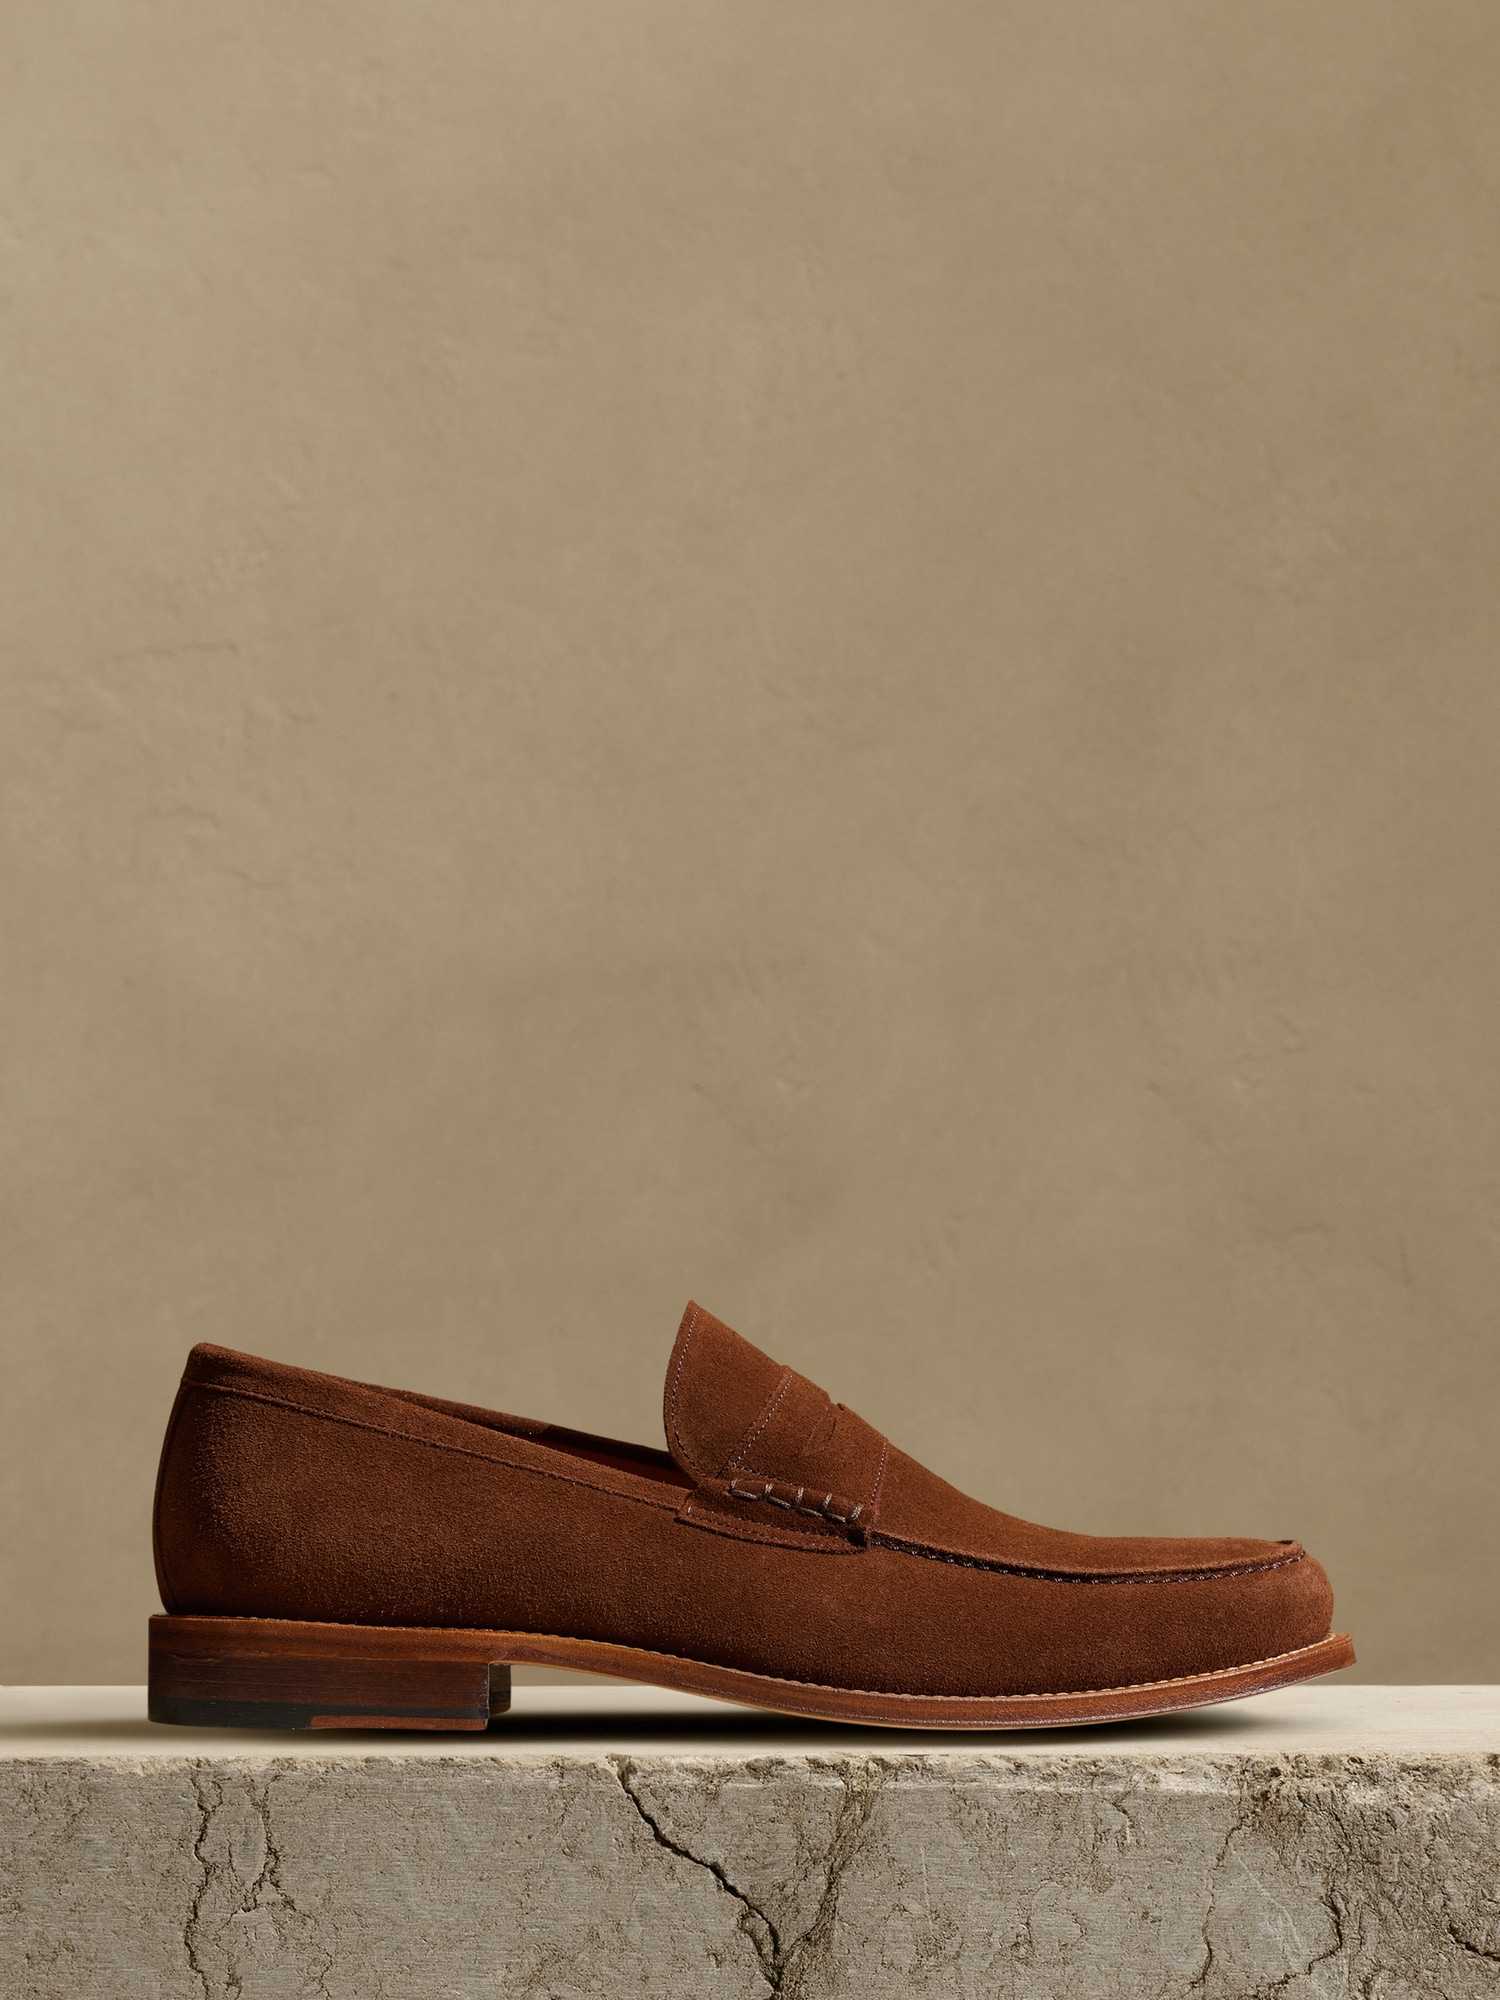 Banana Republic Suede Penny Loafers